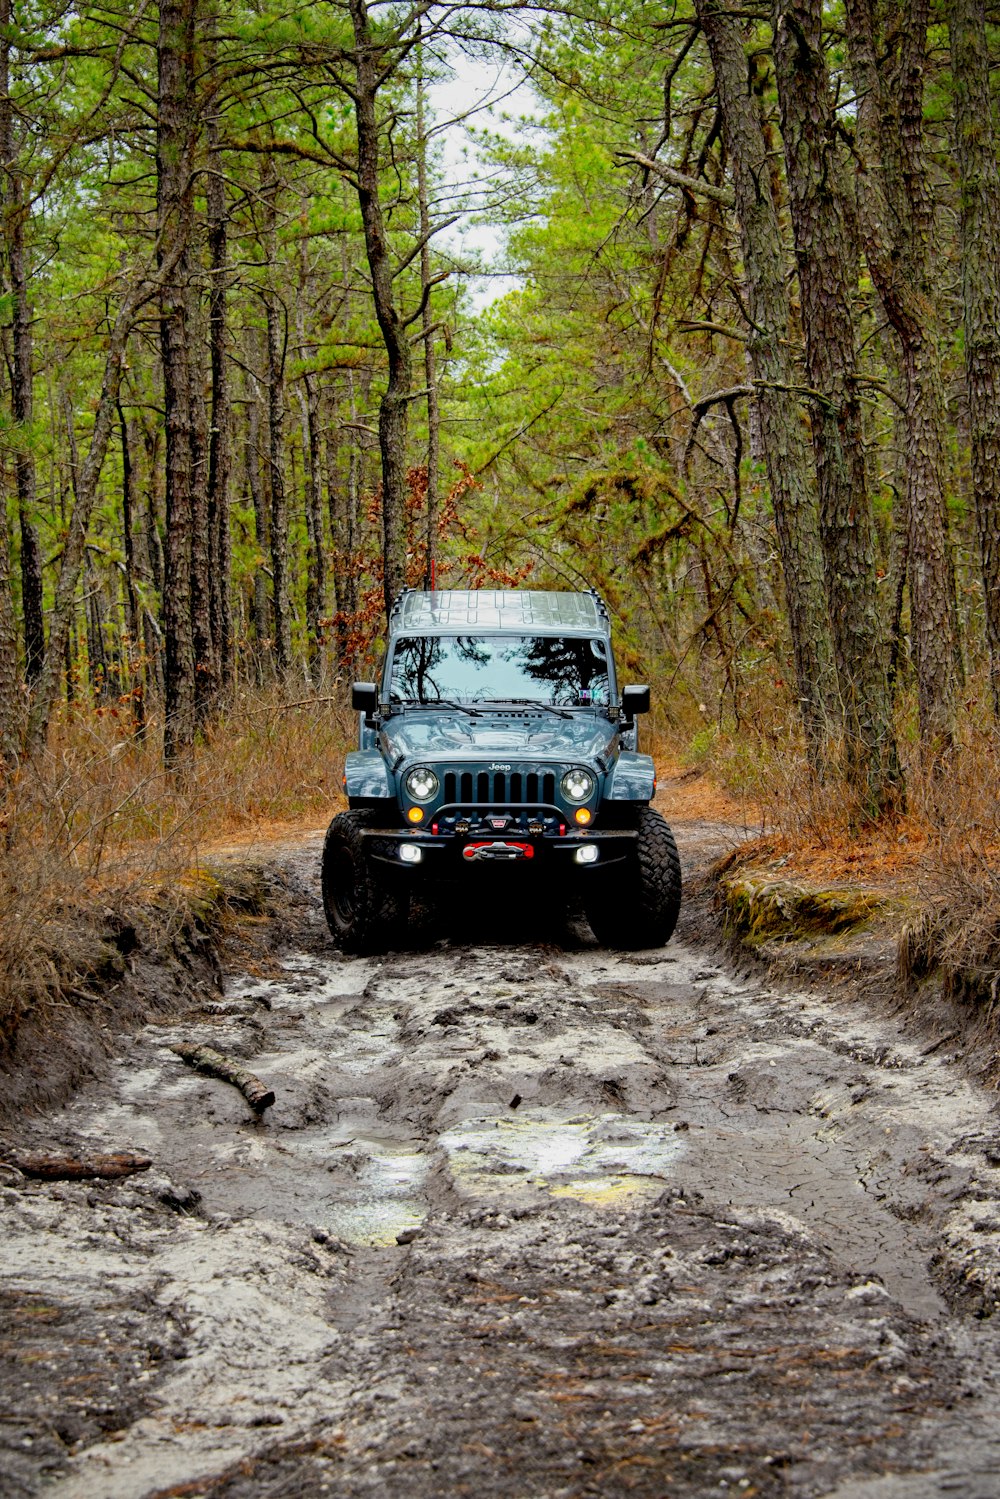 white and black jeep wrangler on dirt road in between trees during daytime